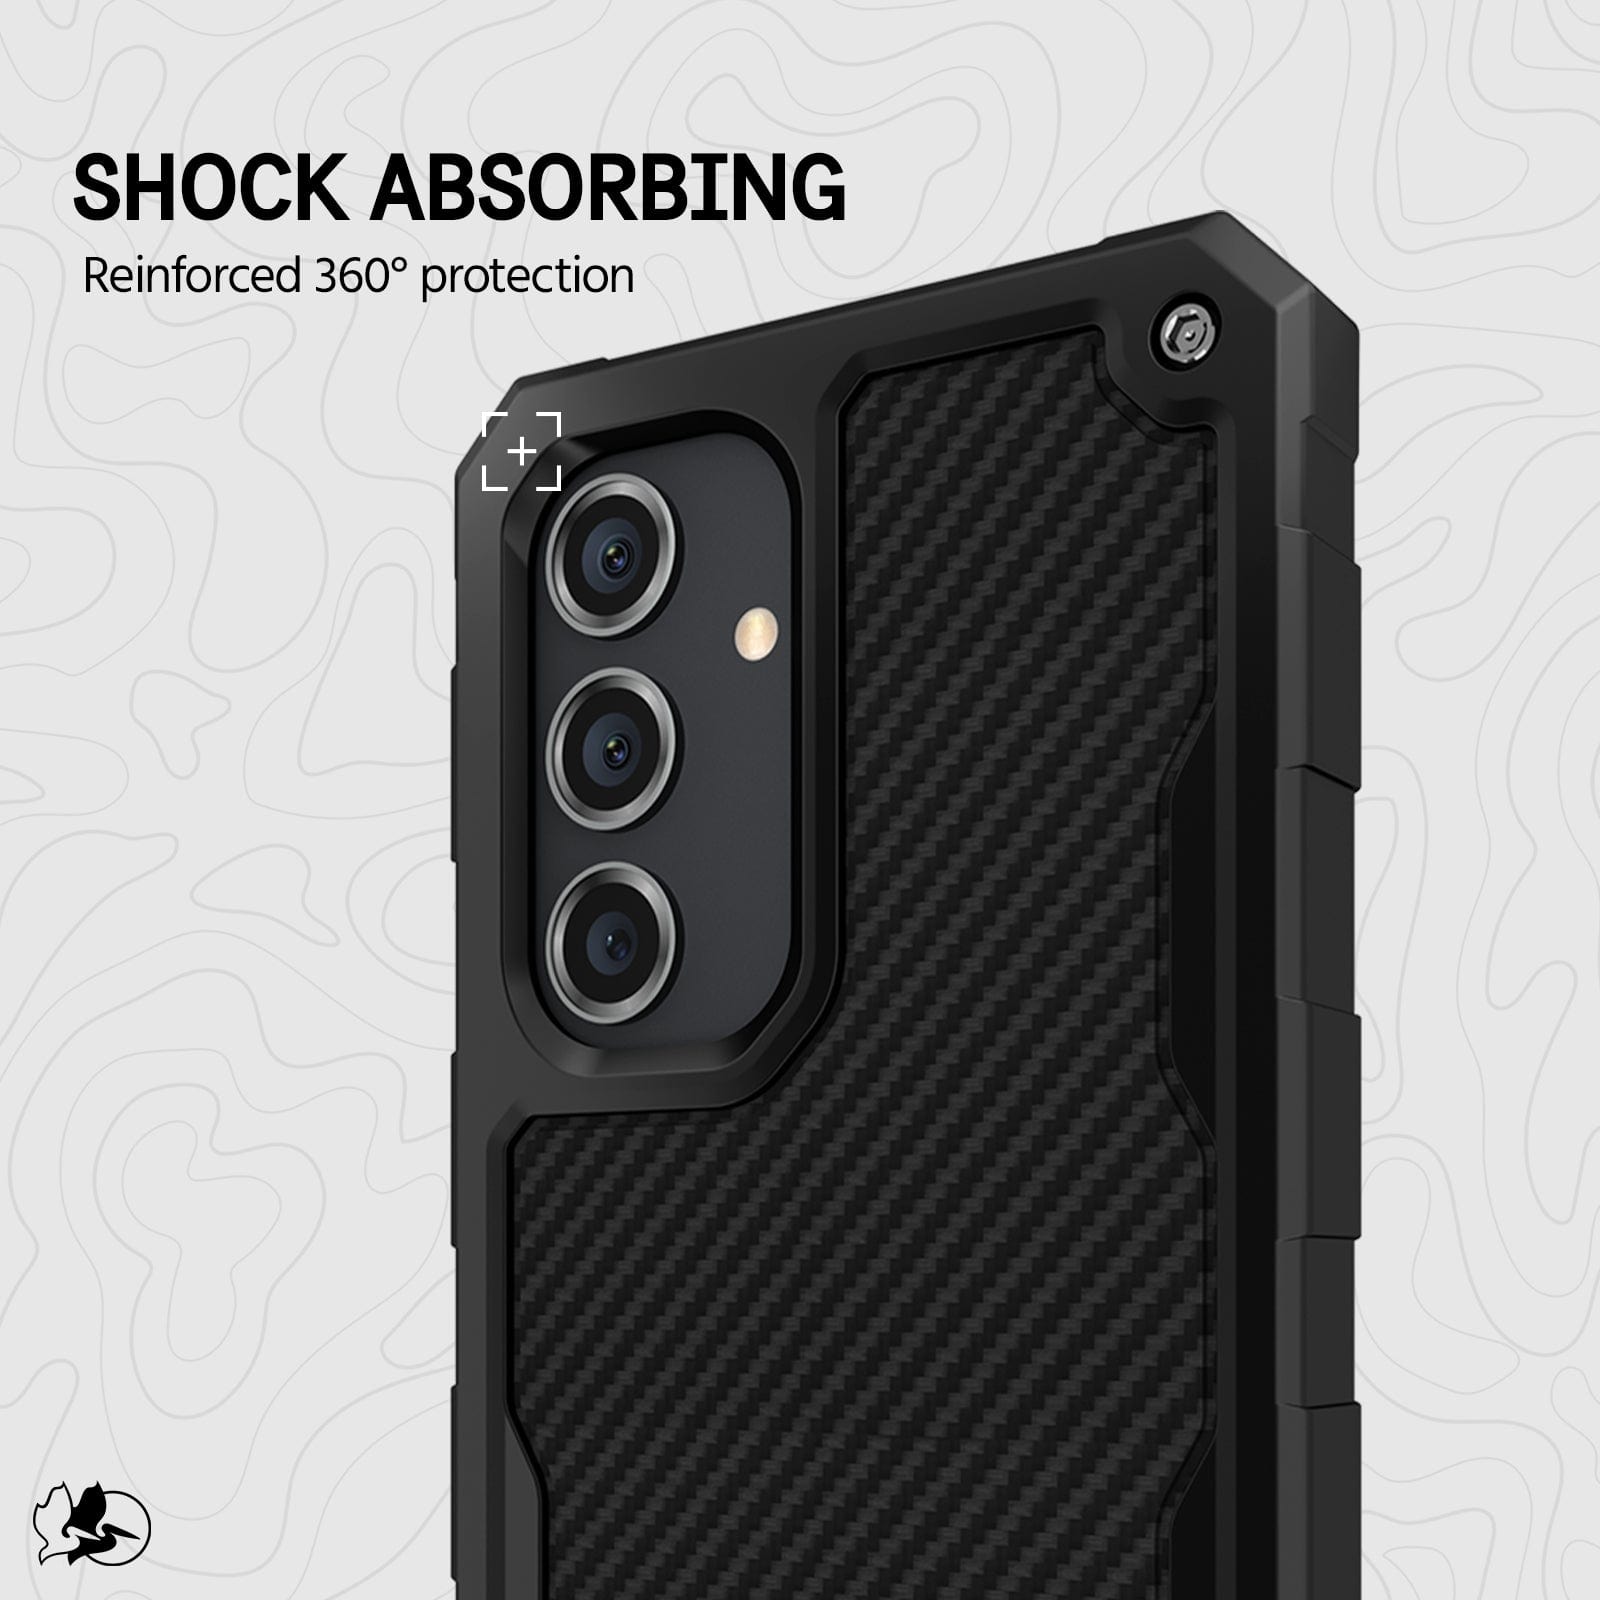 SHCOK ABSORBING REINFORCED 360 DEGREE PROTECTION